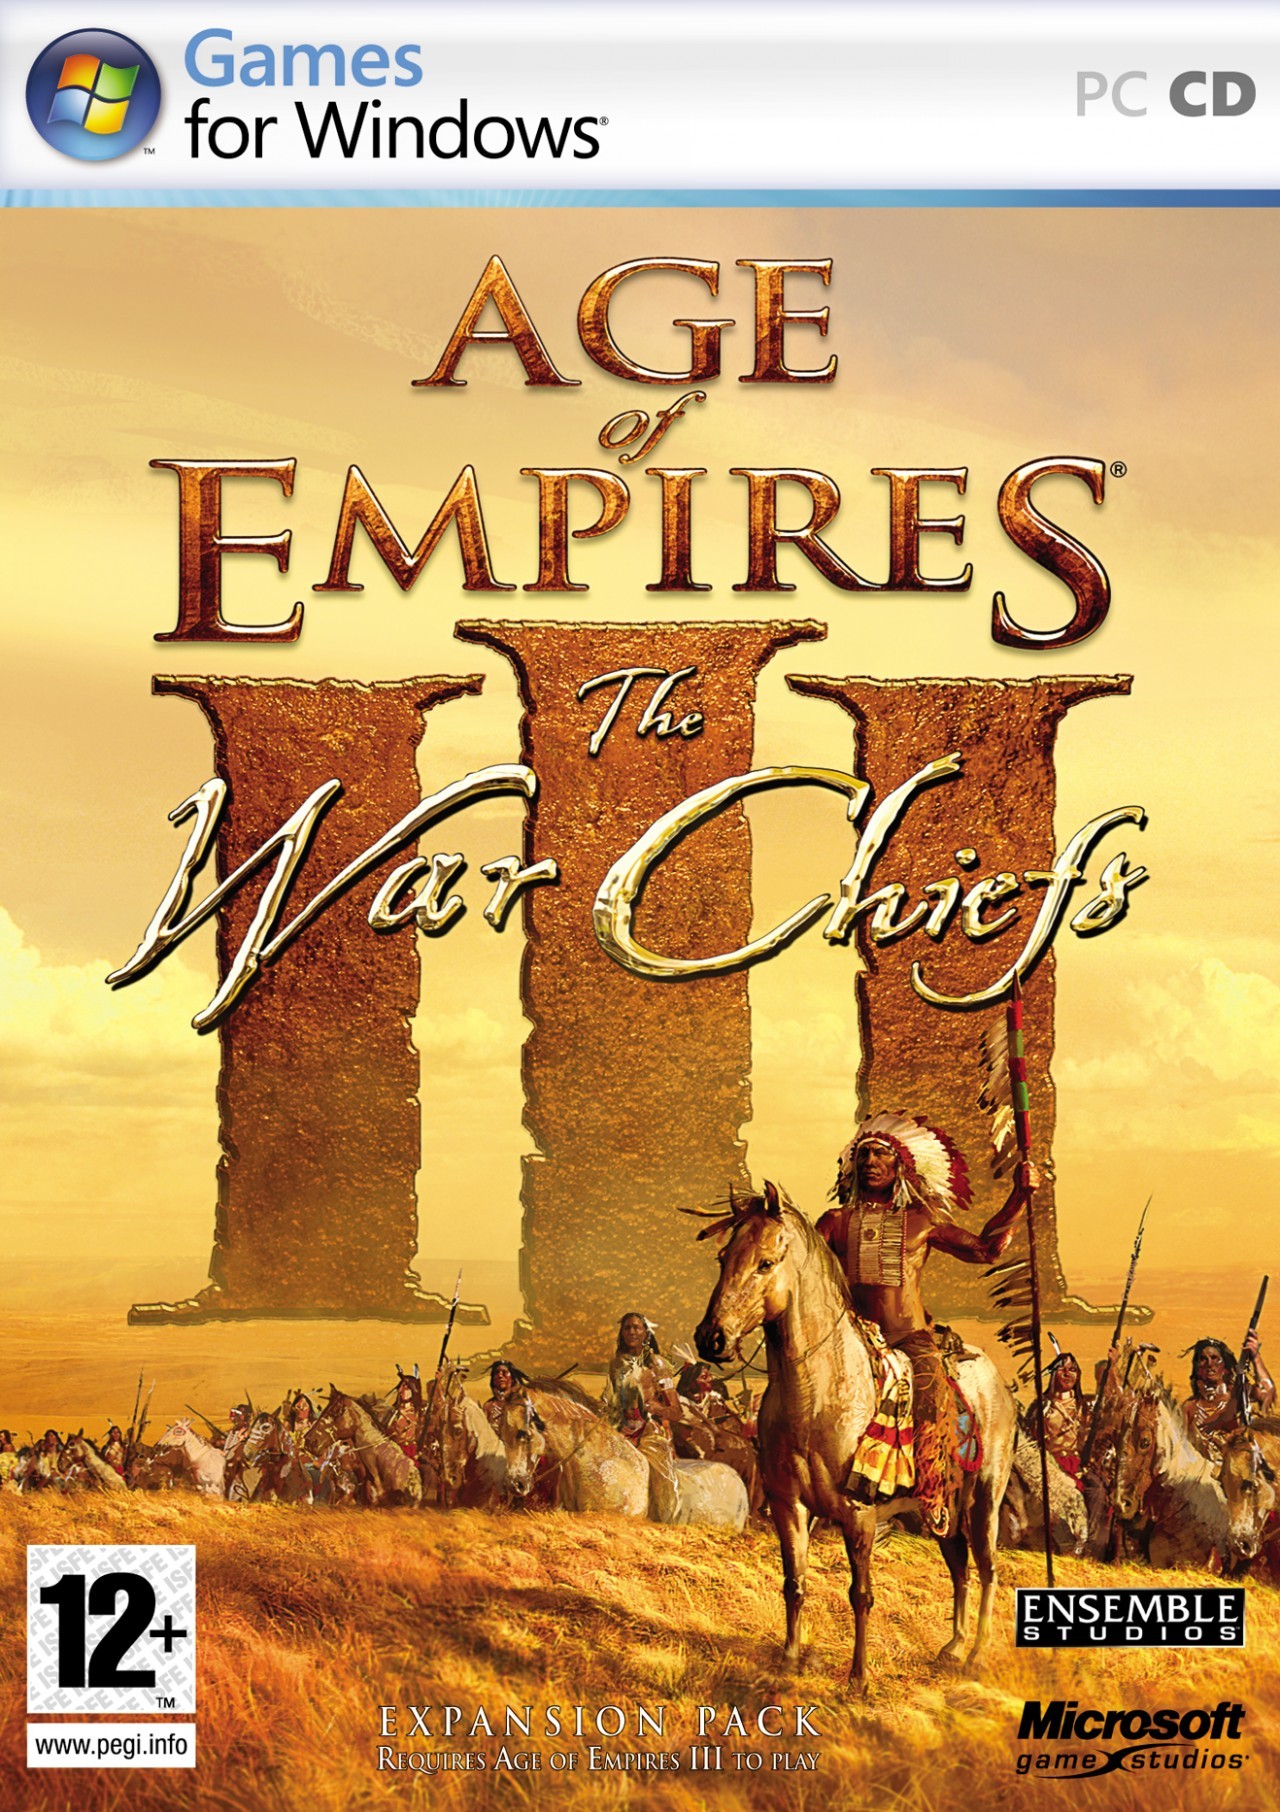 age of empires 3 full soundtrack download